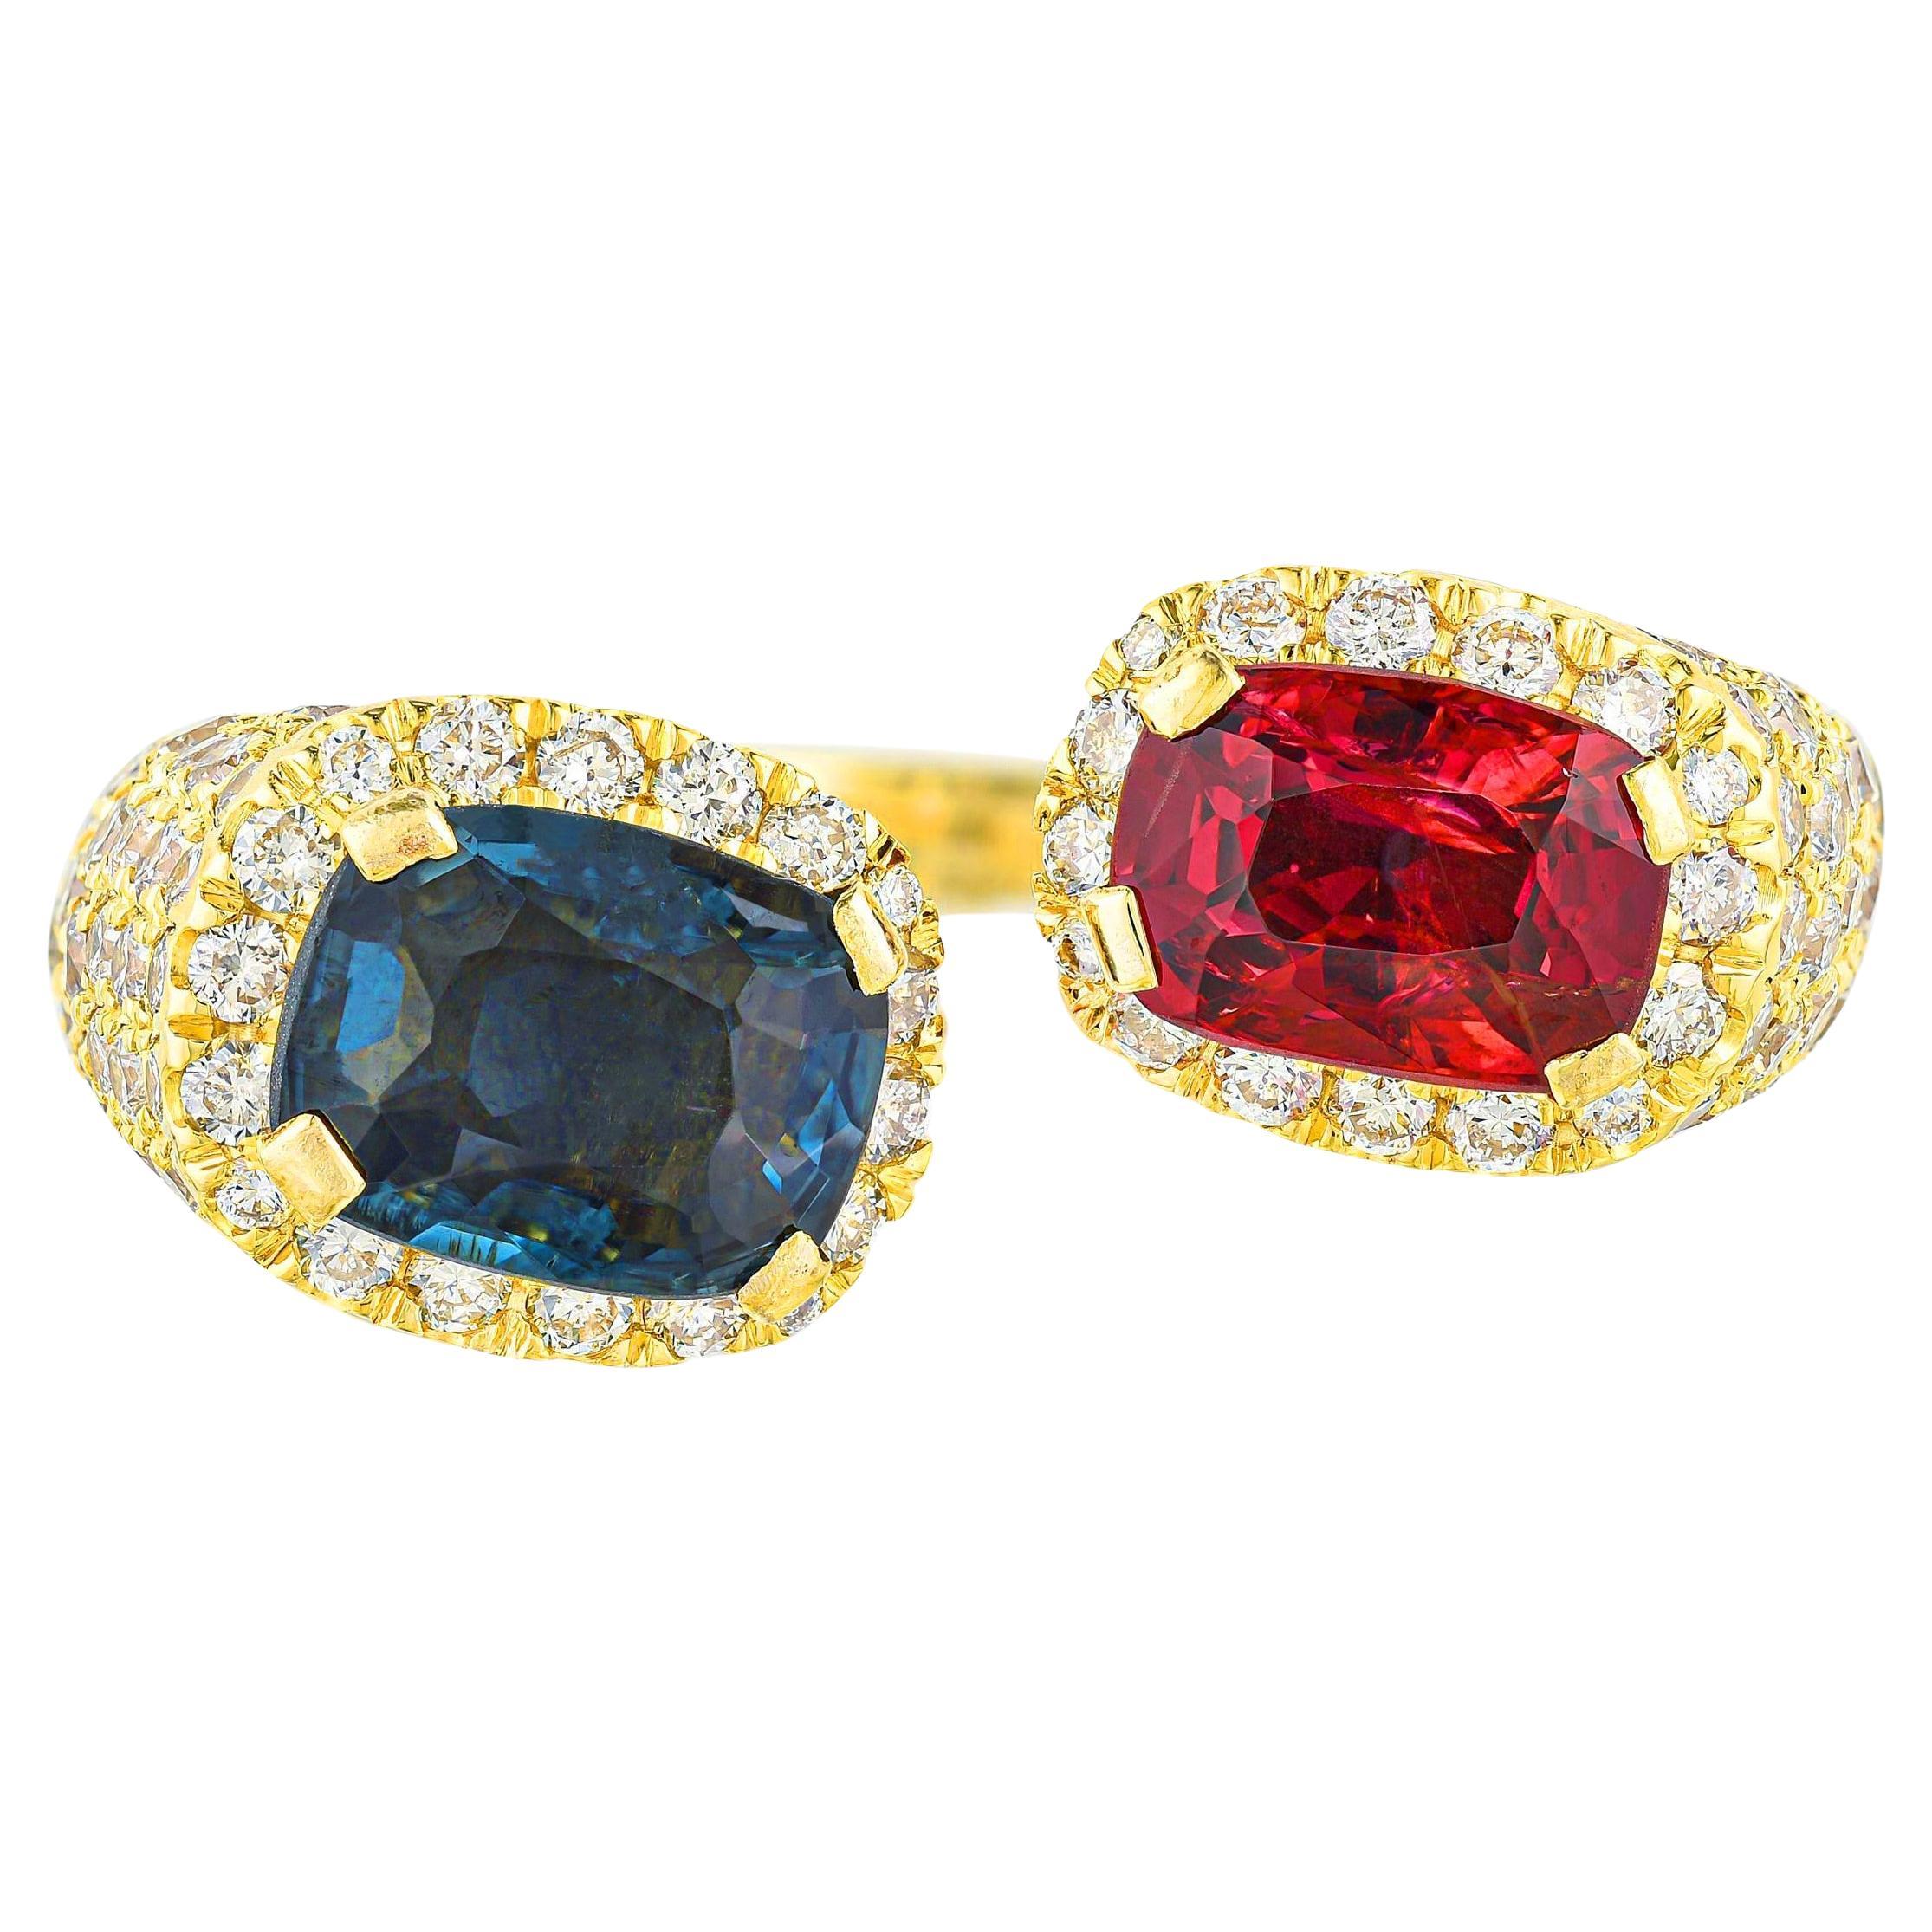 Rare Nature Blue and Red Spinel Bypass Ring Diamond Setting 4 Carats 18K Gold en vente